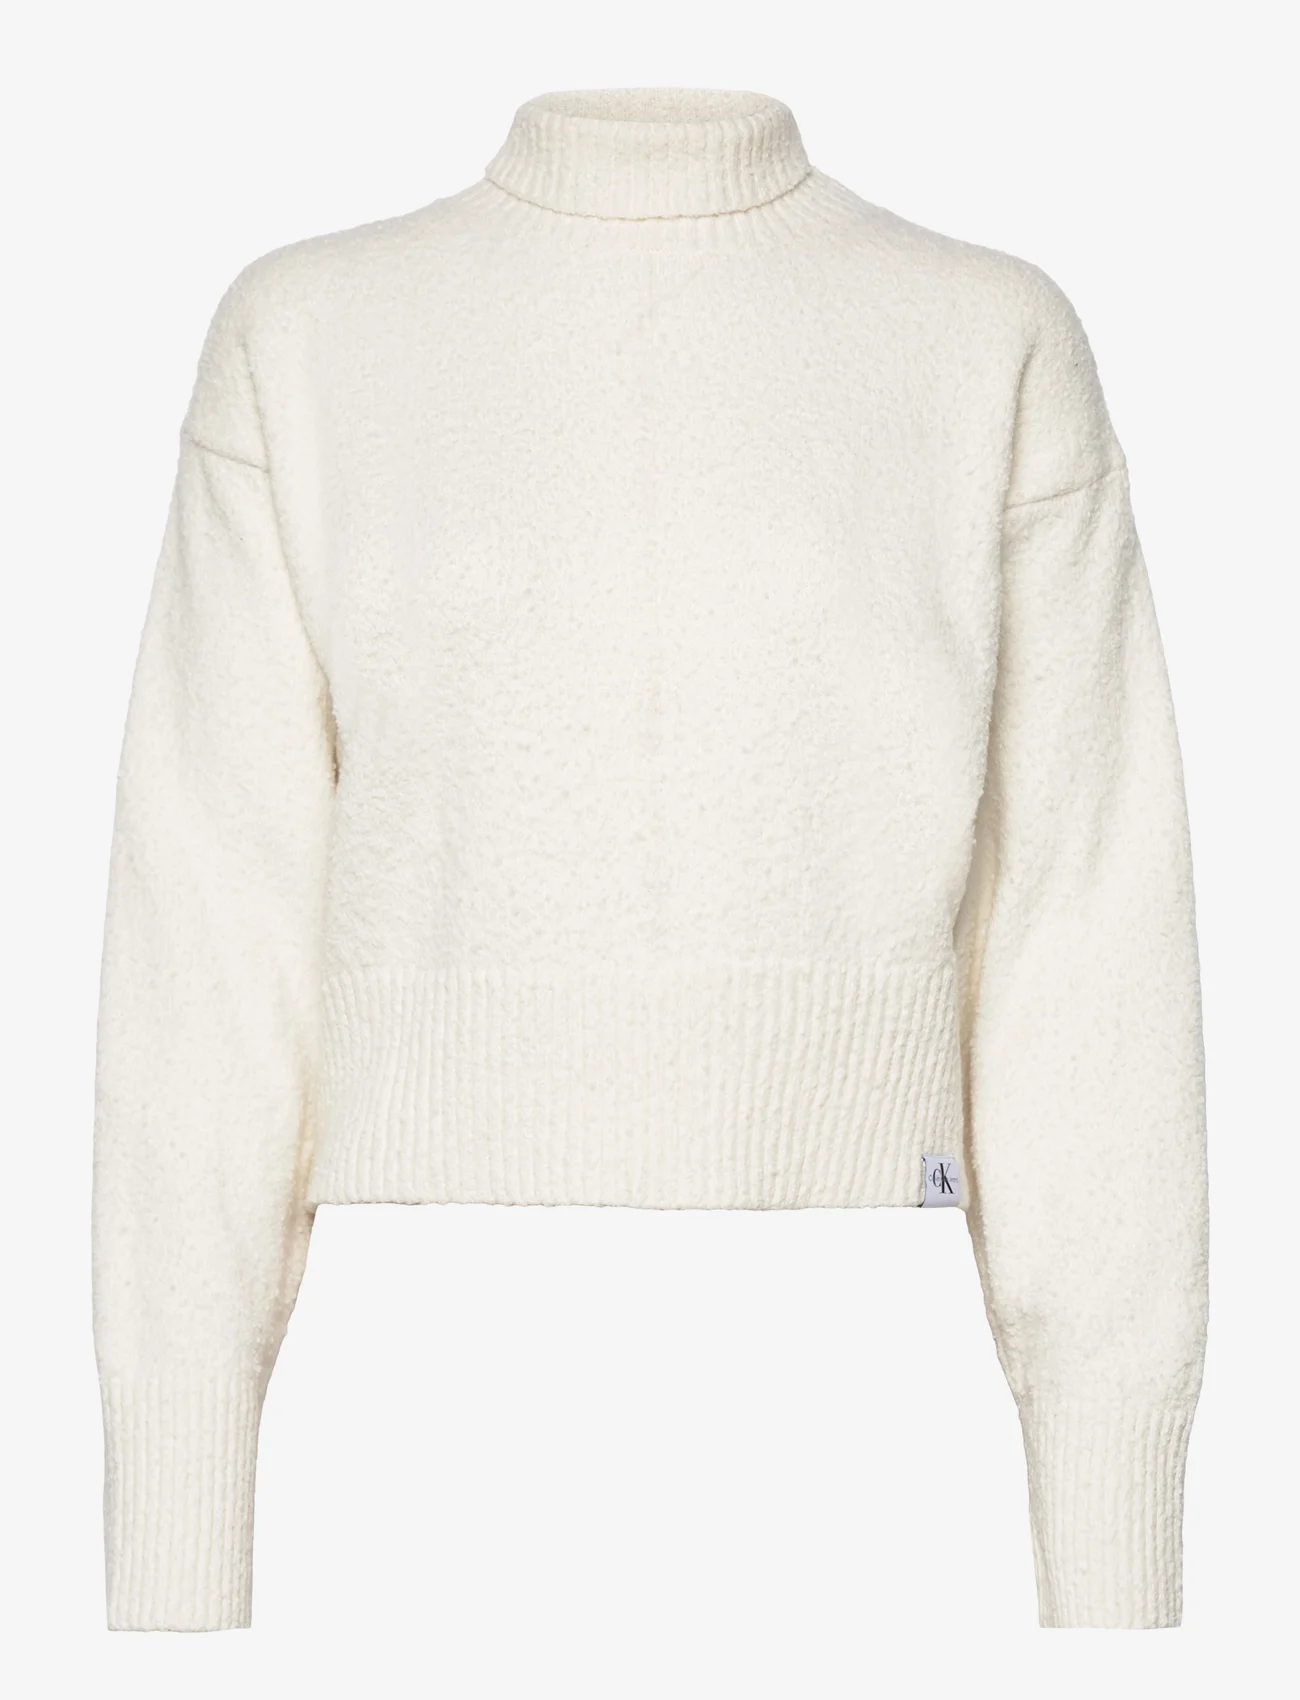 Calvin Klein Jeans - BOUCLE HIGH NECK SWEATER - gensere - ivory - 0